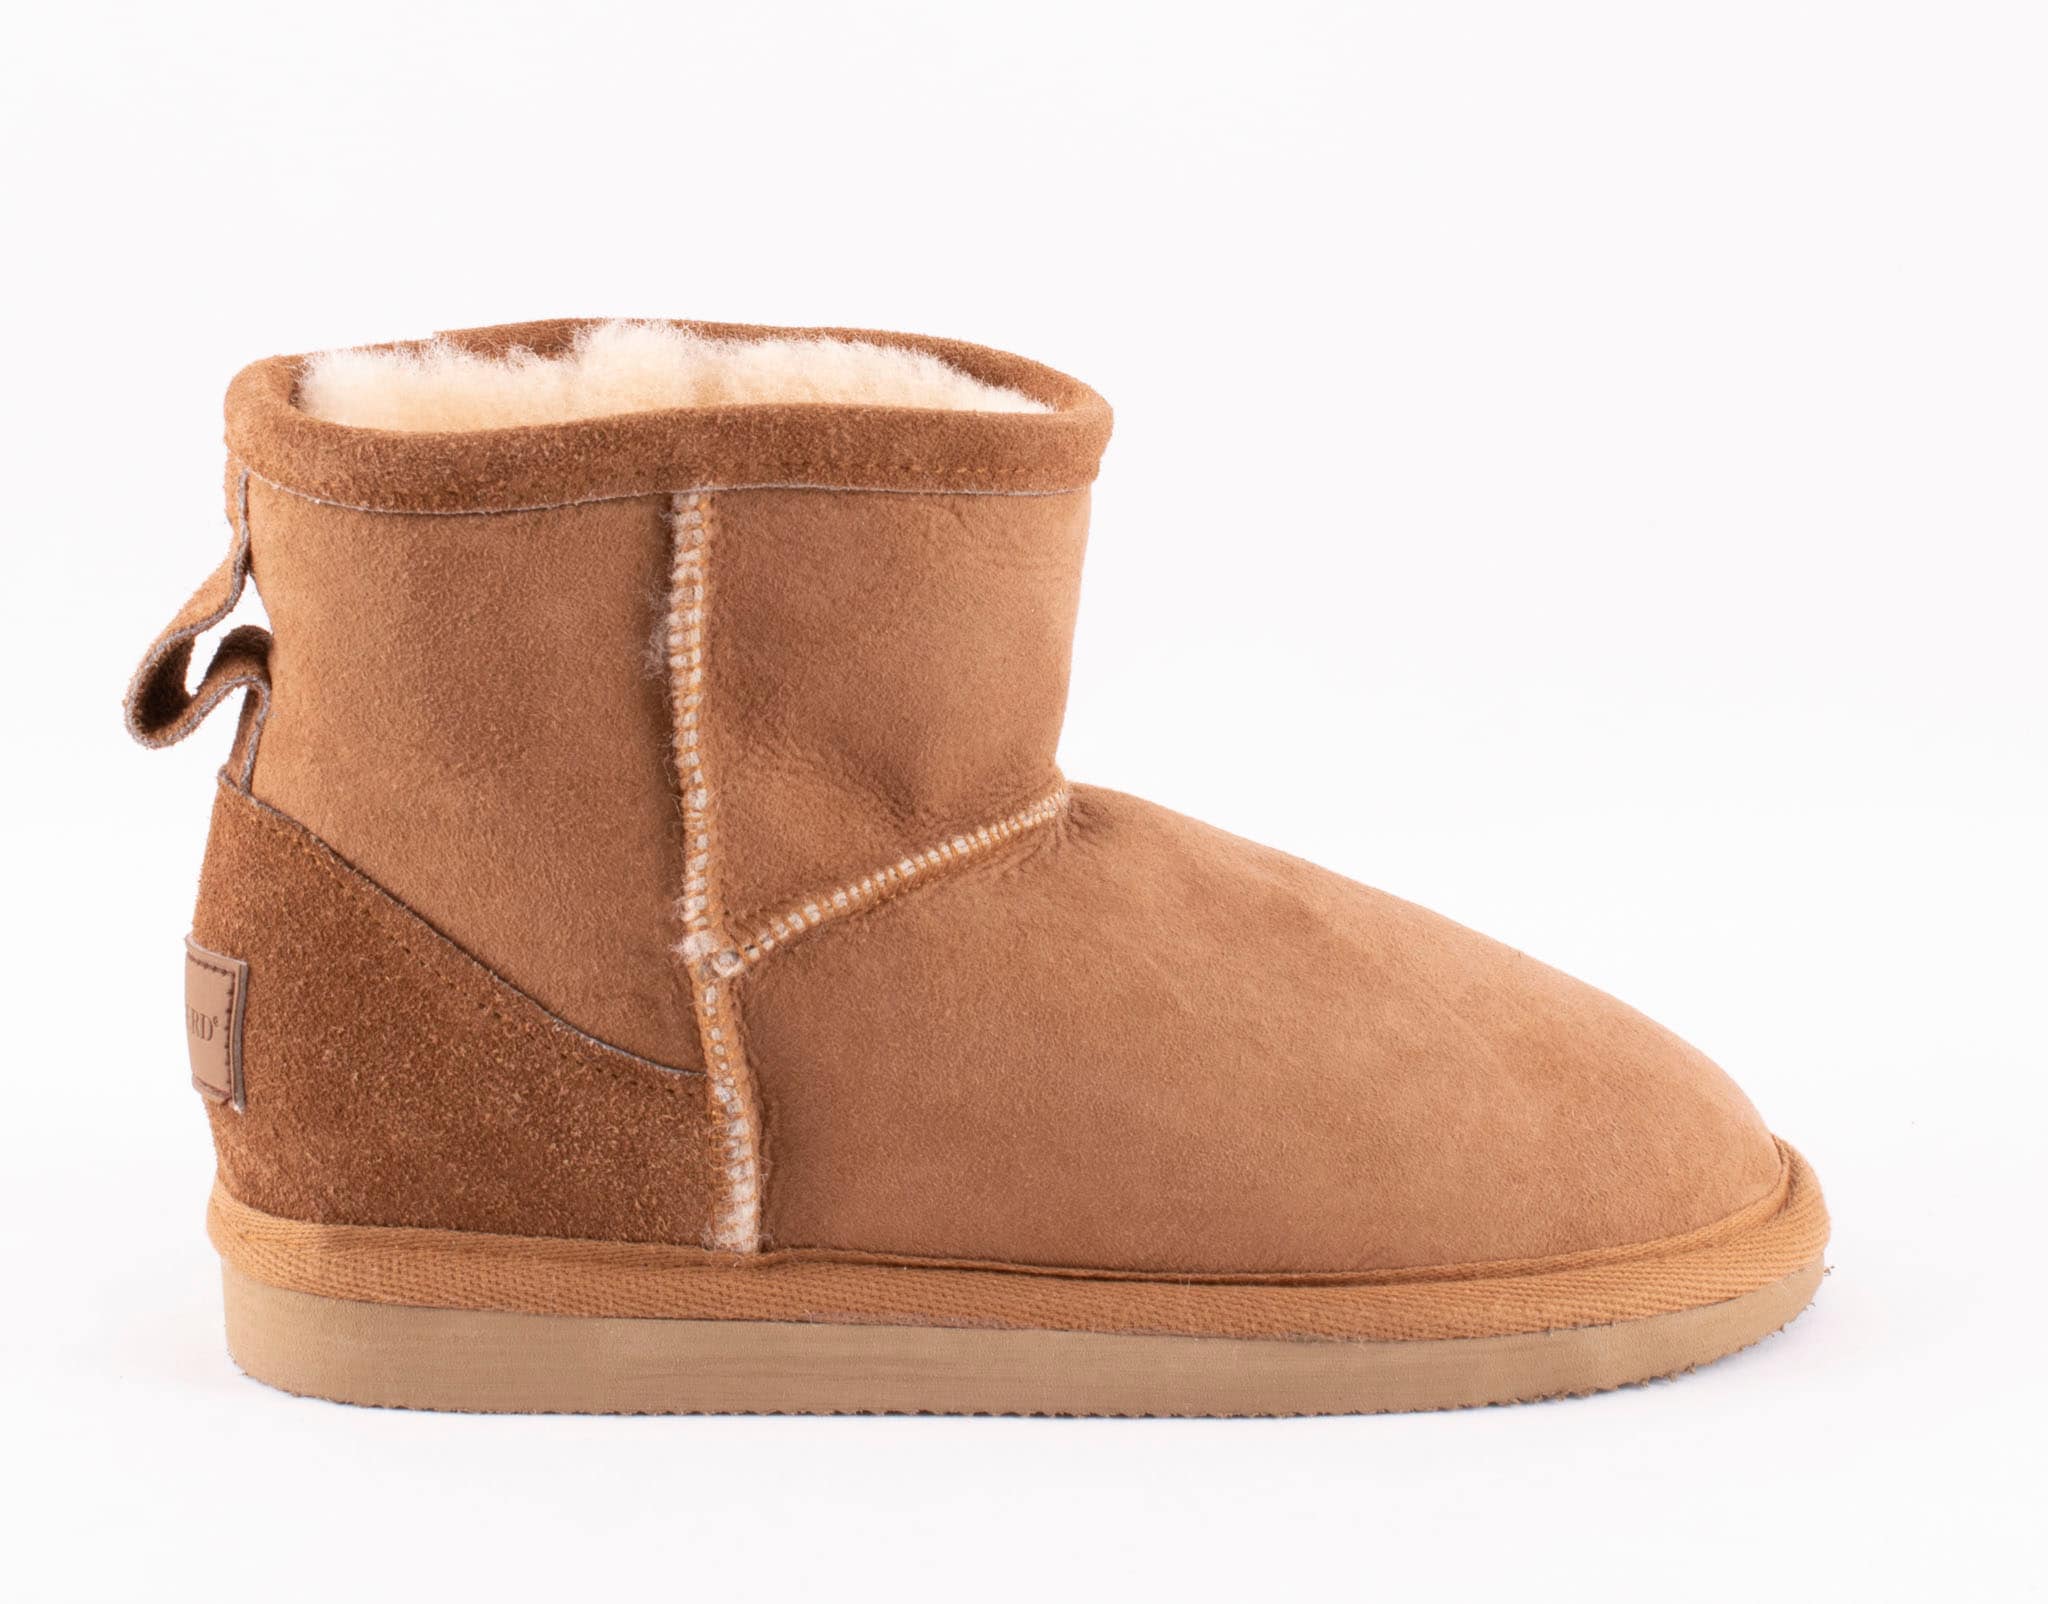 A pair of brown ankel high sheepskin boots with a warm and comfortable sheepskin inside.